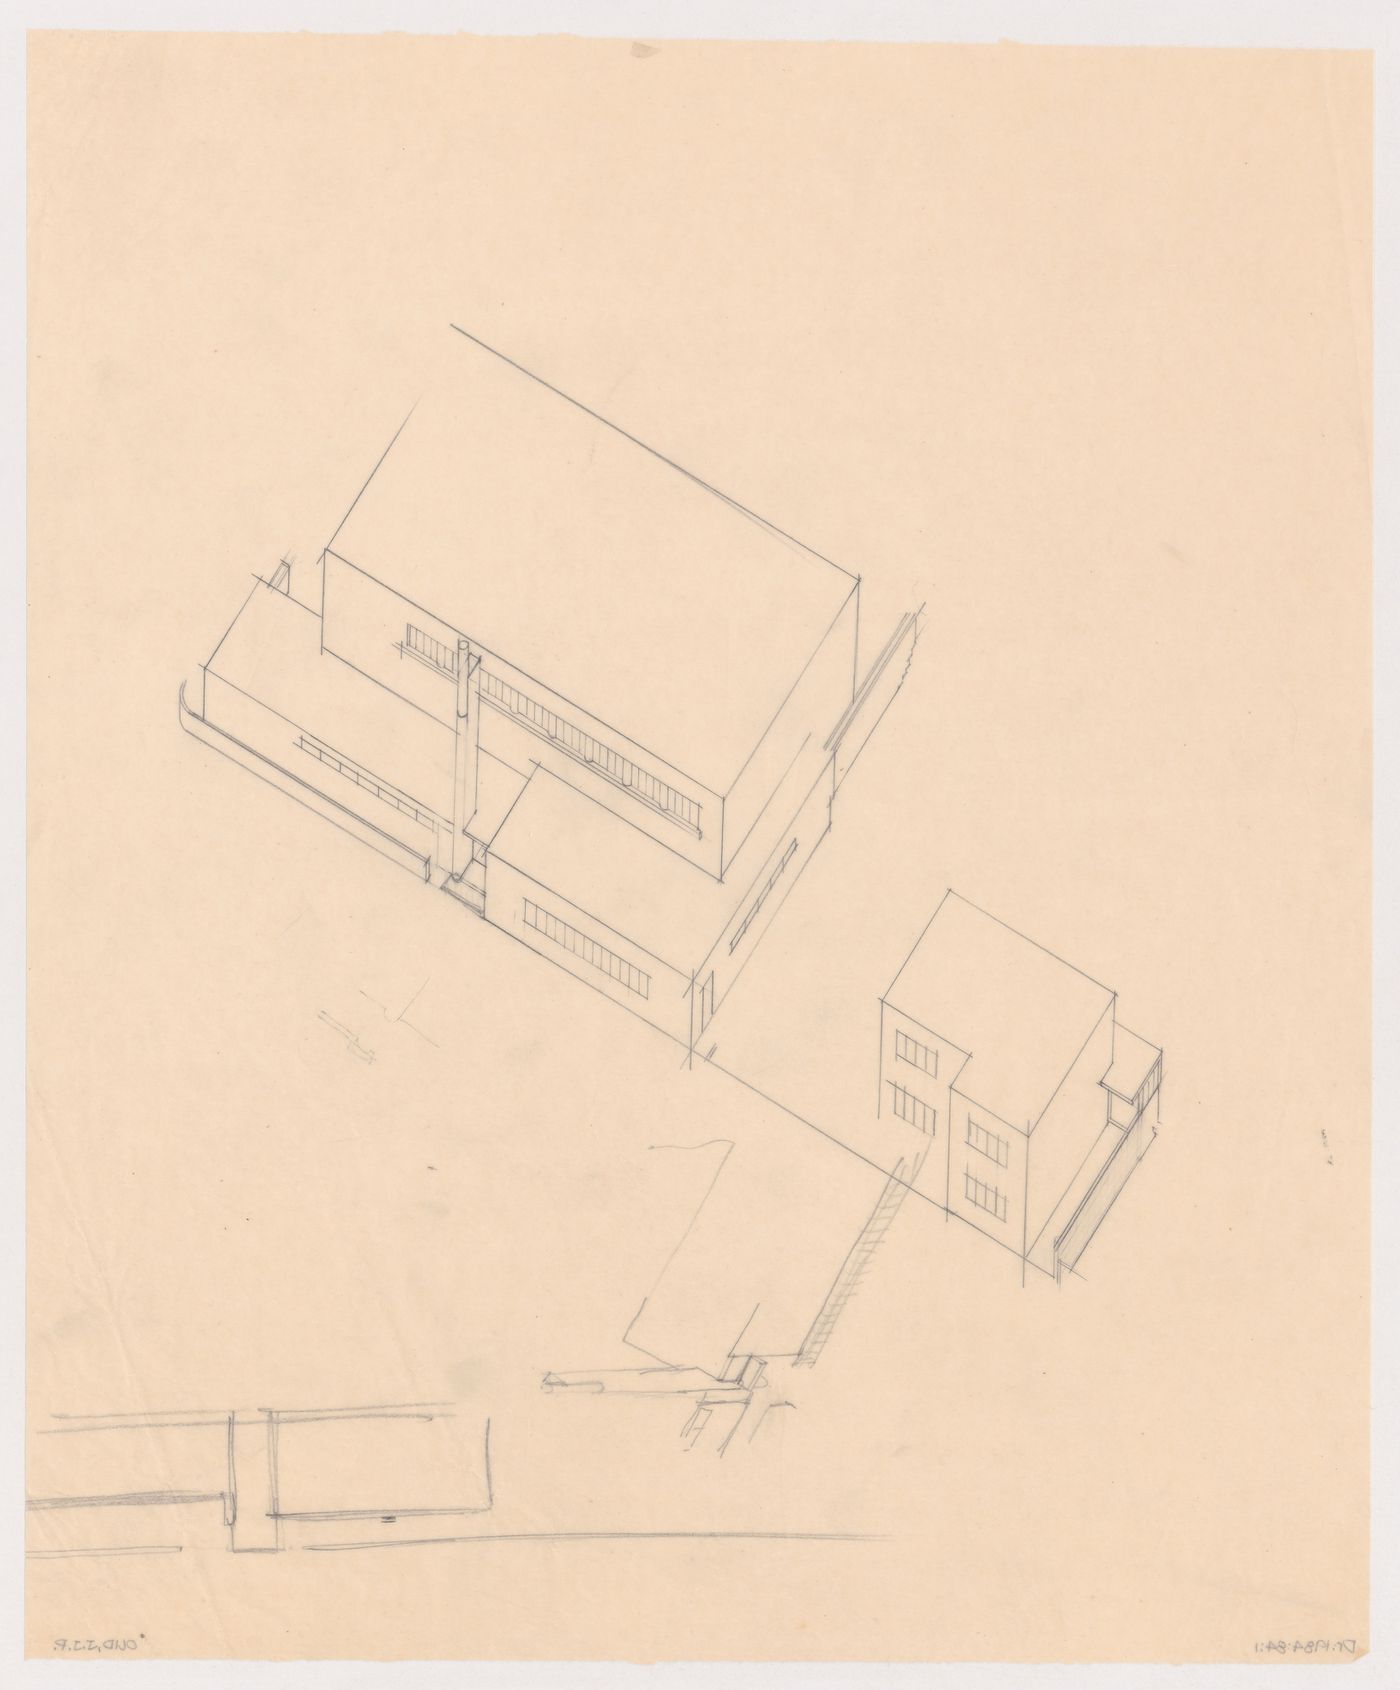 Bird's-eye axonometric, partial axonometric and partial sketch plan for the church for Kiefhoek Housing Estate, Rotterdam, Netherlands